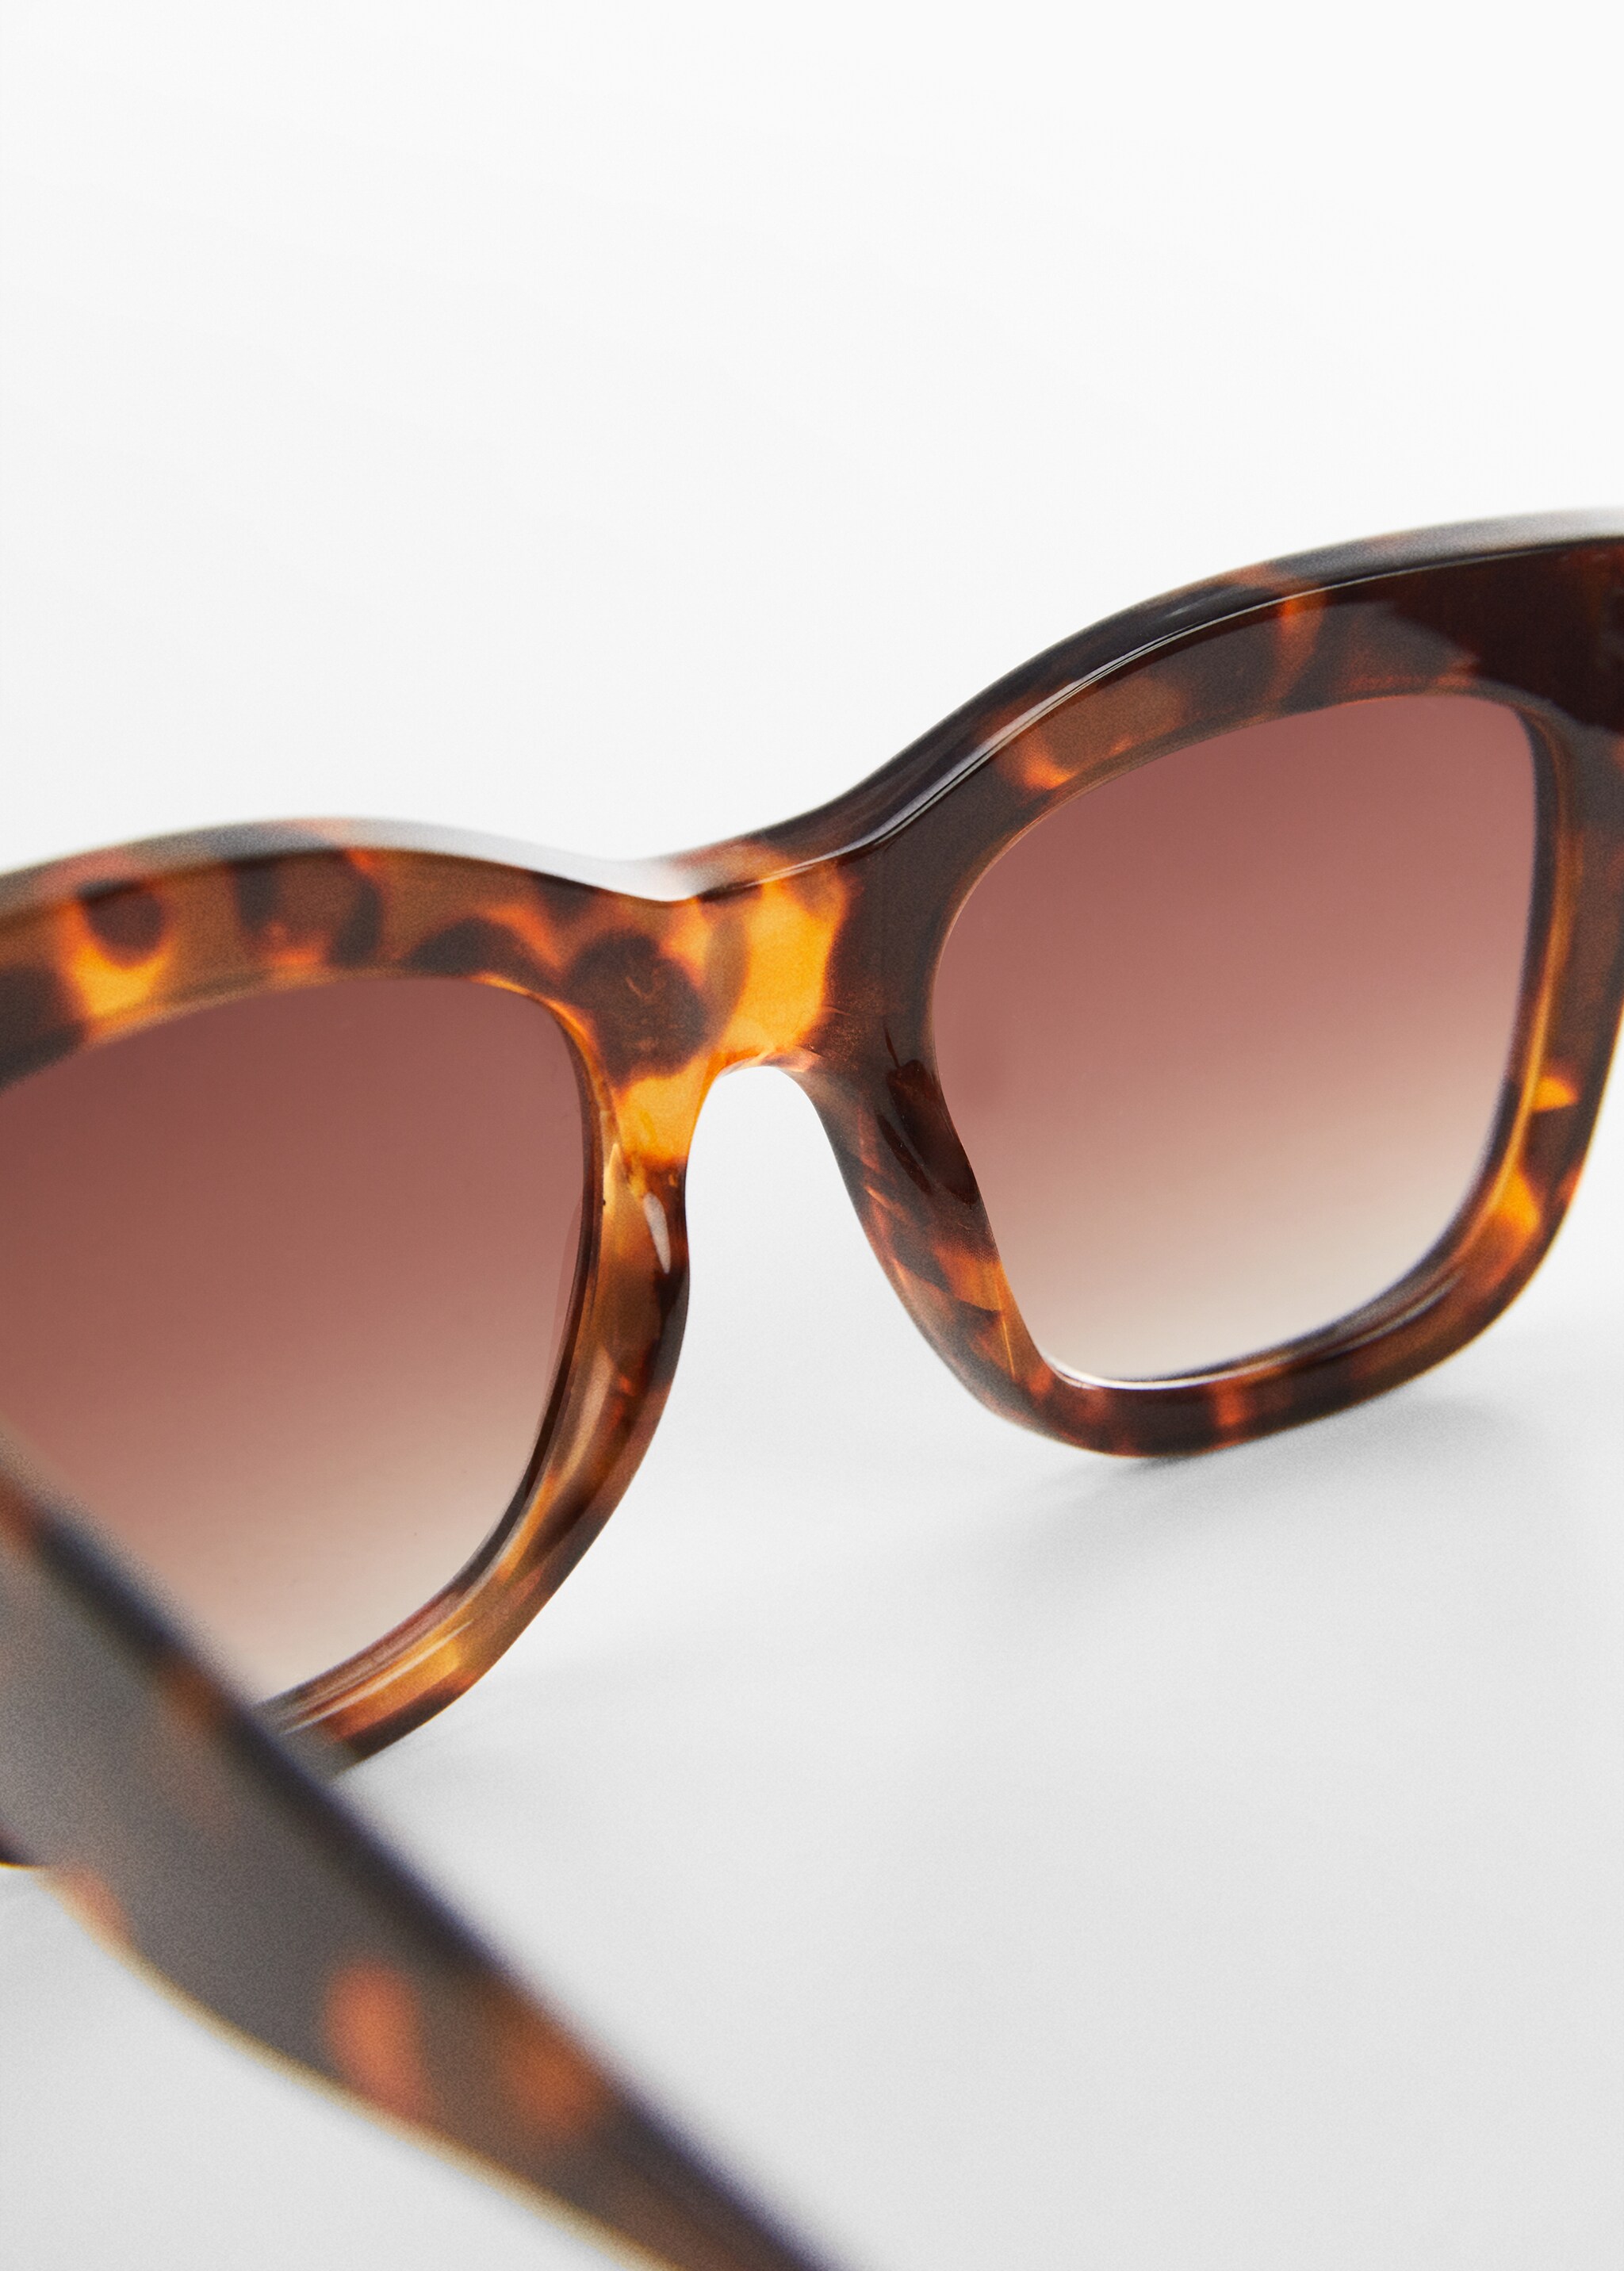 Squared frame sunglasses - Details of the article 1